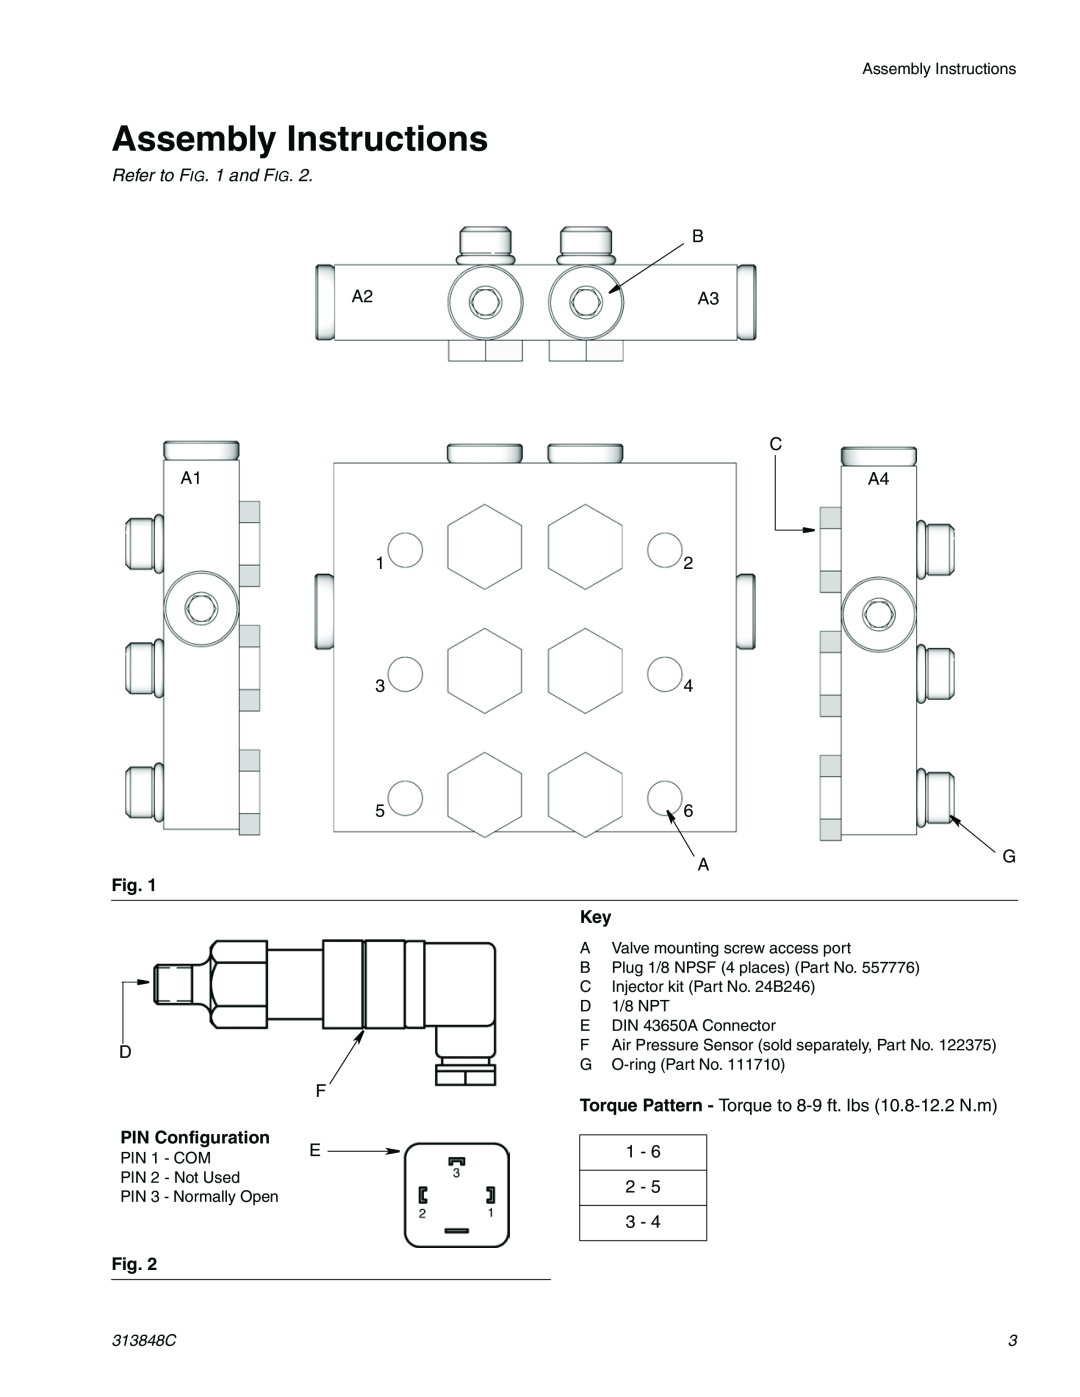 Graco 24B241, 24J817, 24J815, 24B239, 24J814, 24B240 Assembly Instructions, Refer to and FIG, PIN Configuration, 313848C 